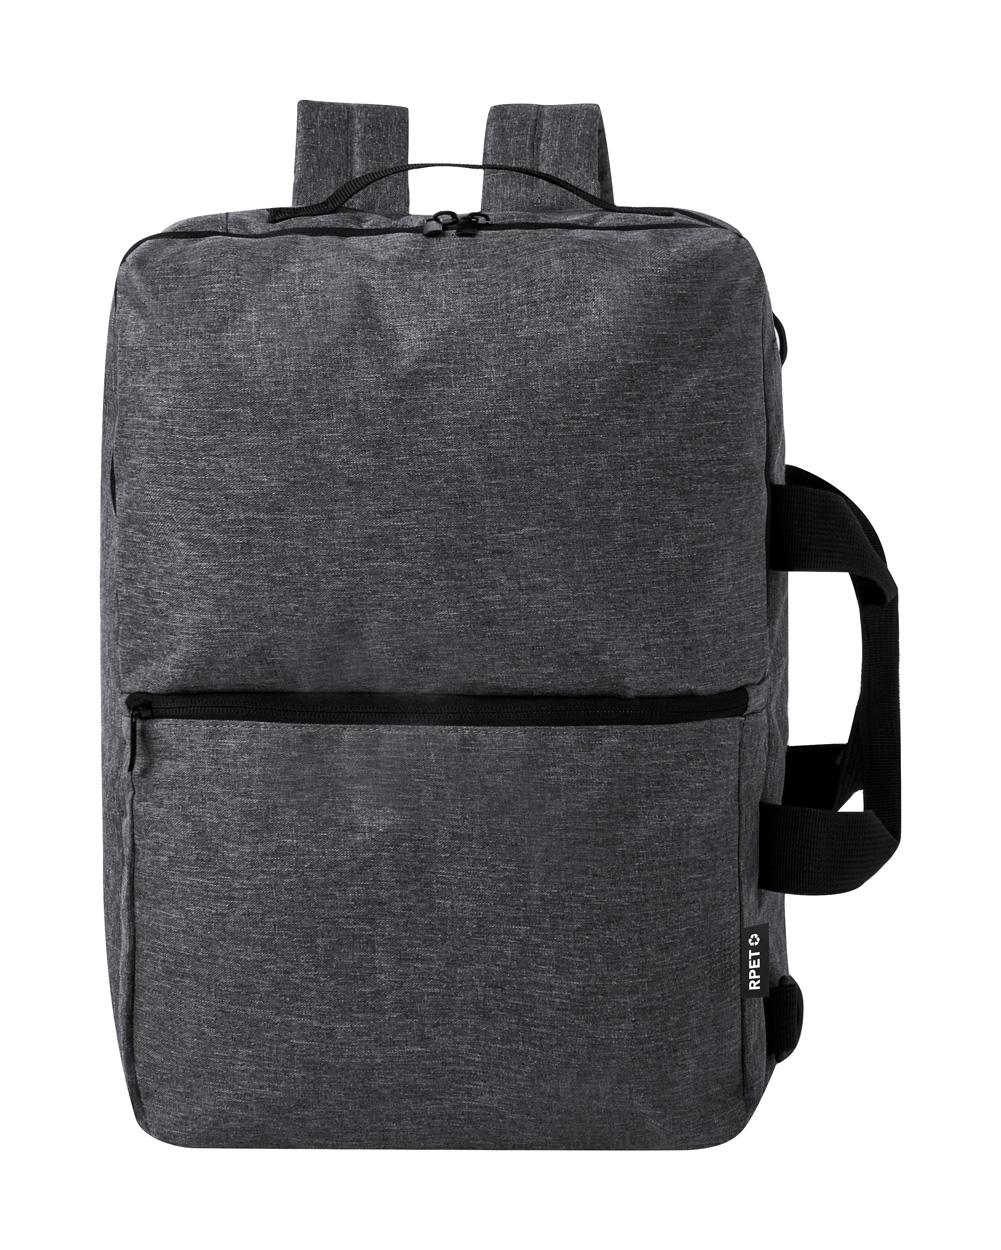 Promo  Makarzur RPET document backpack